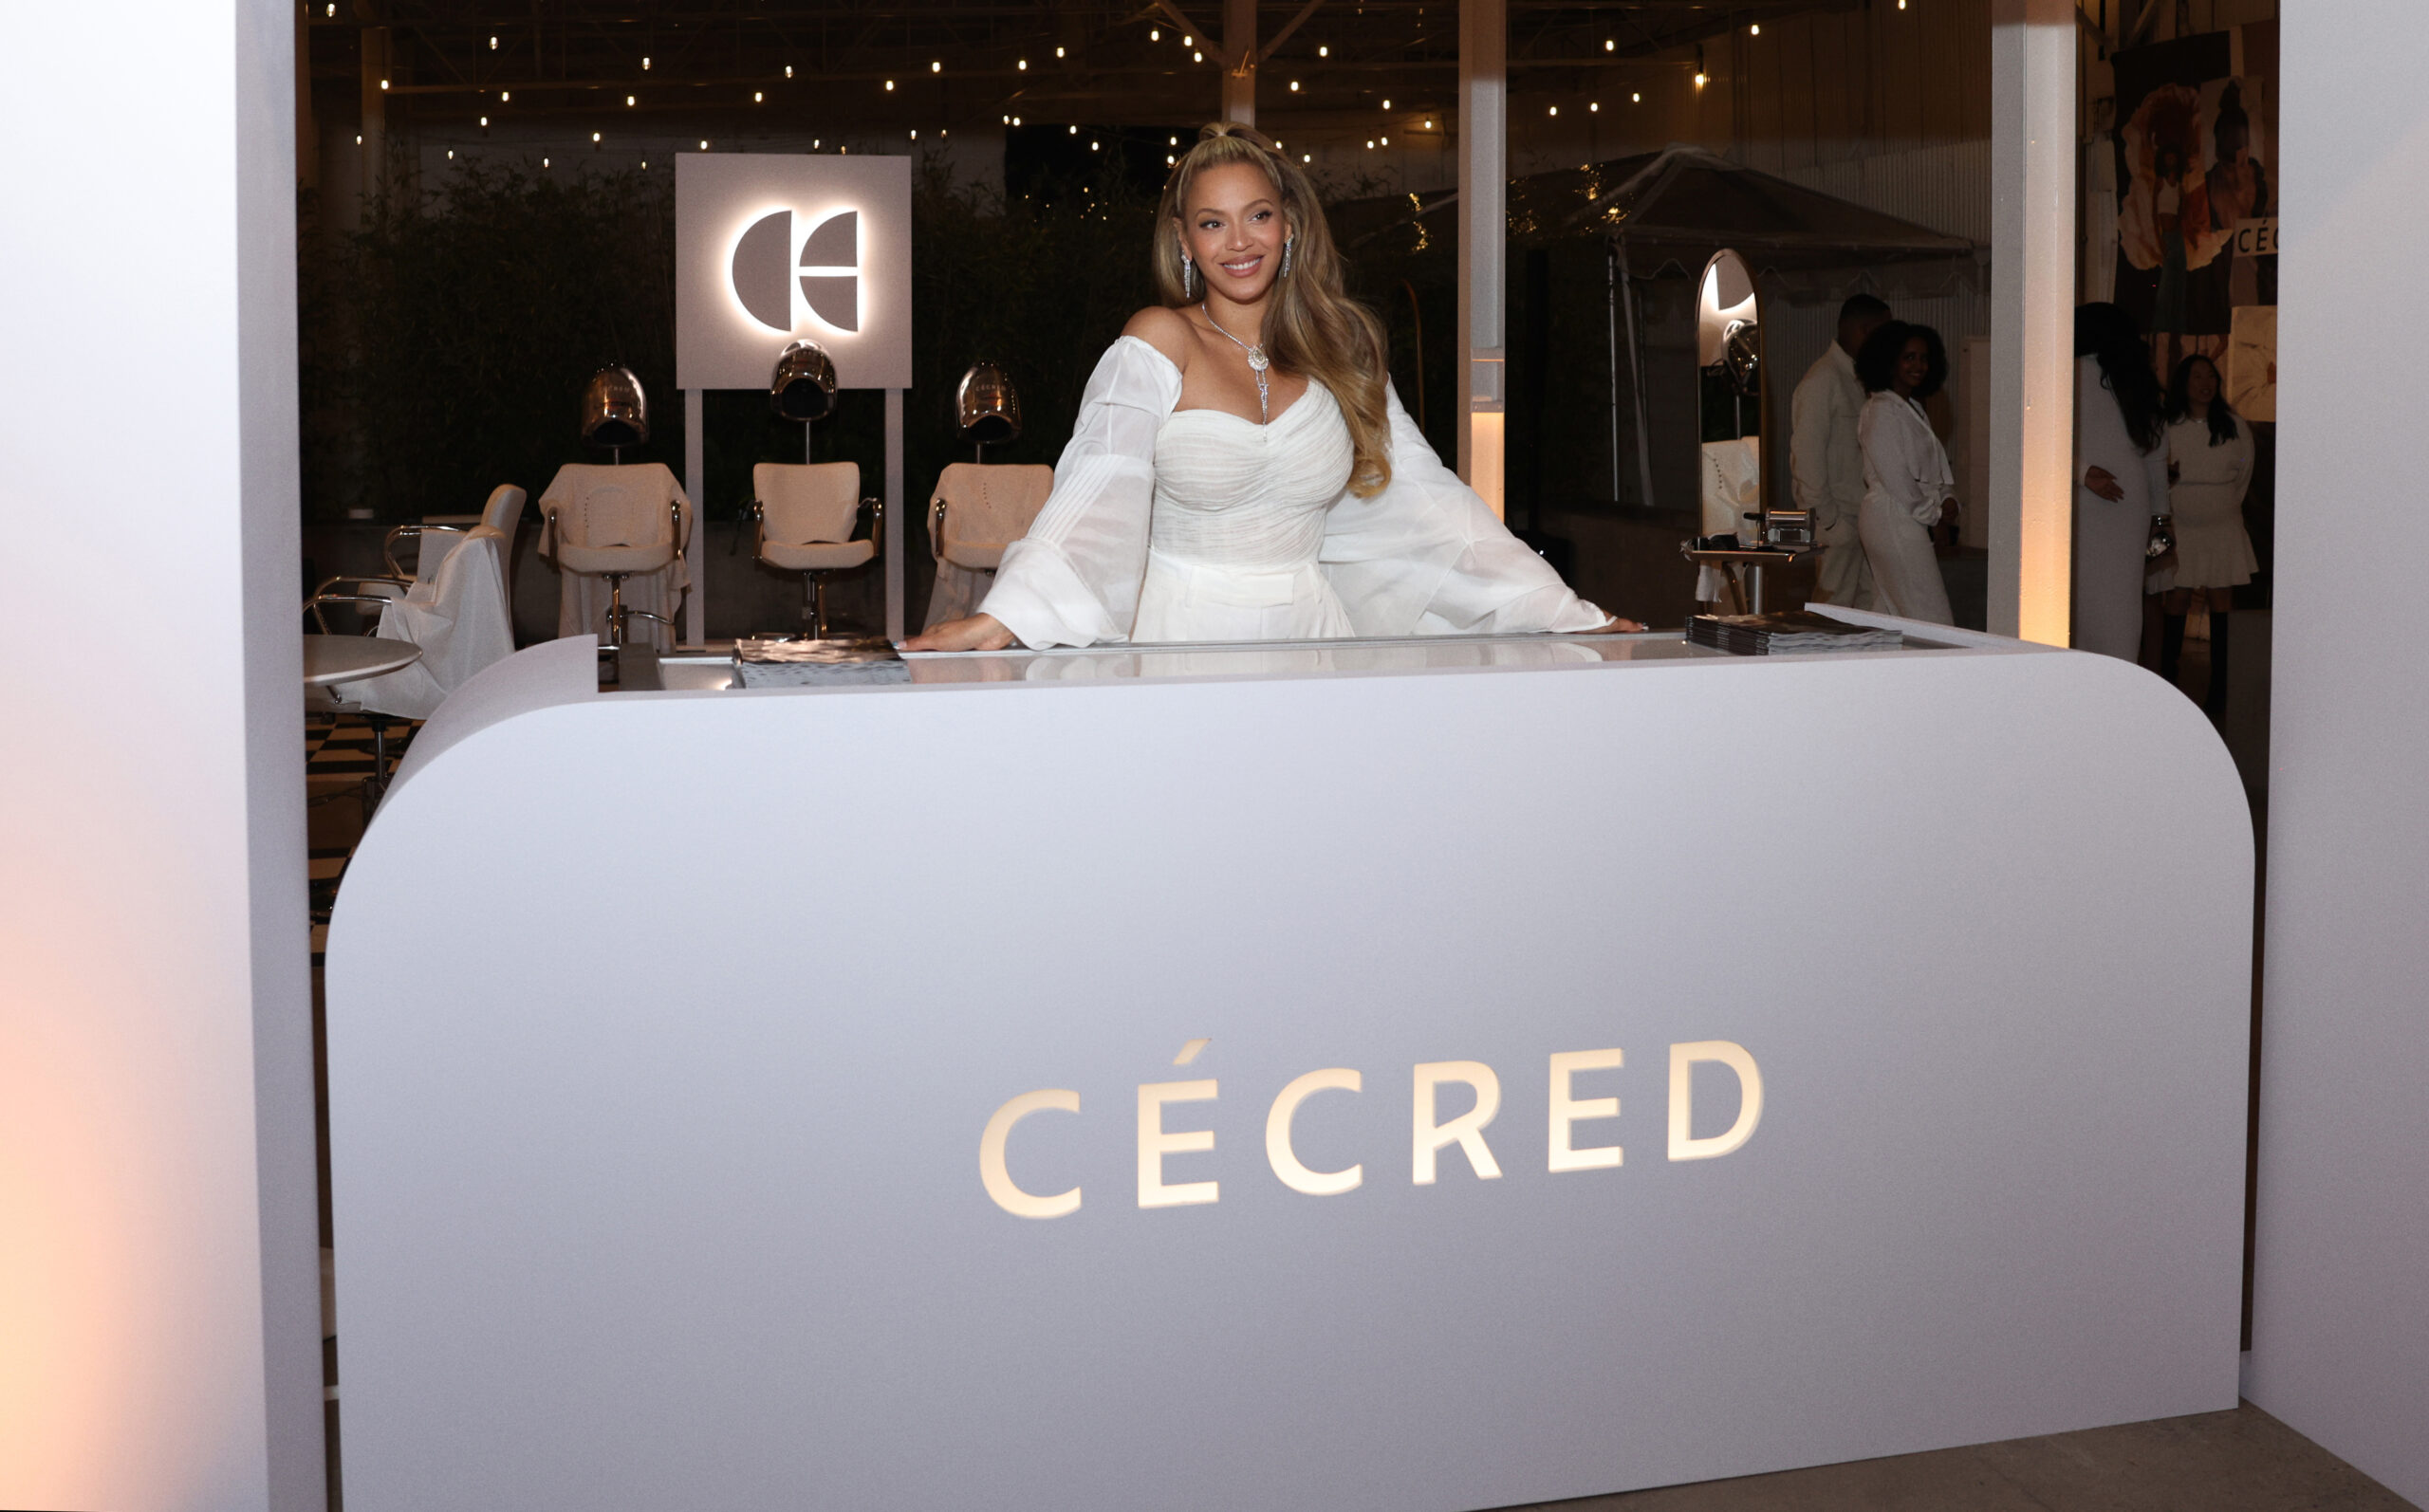 Beyoncé Shows Off Real Hair During Cécred Wash Day